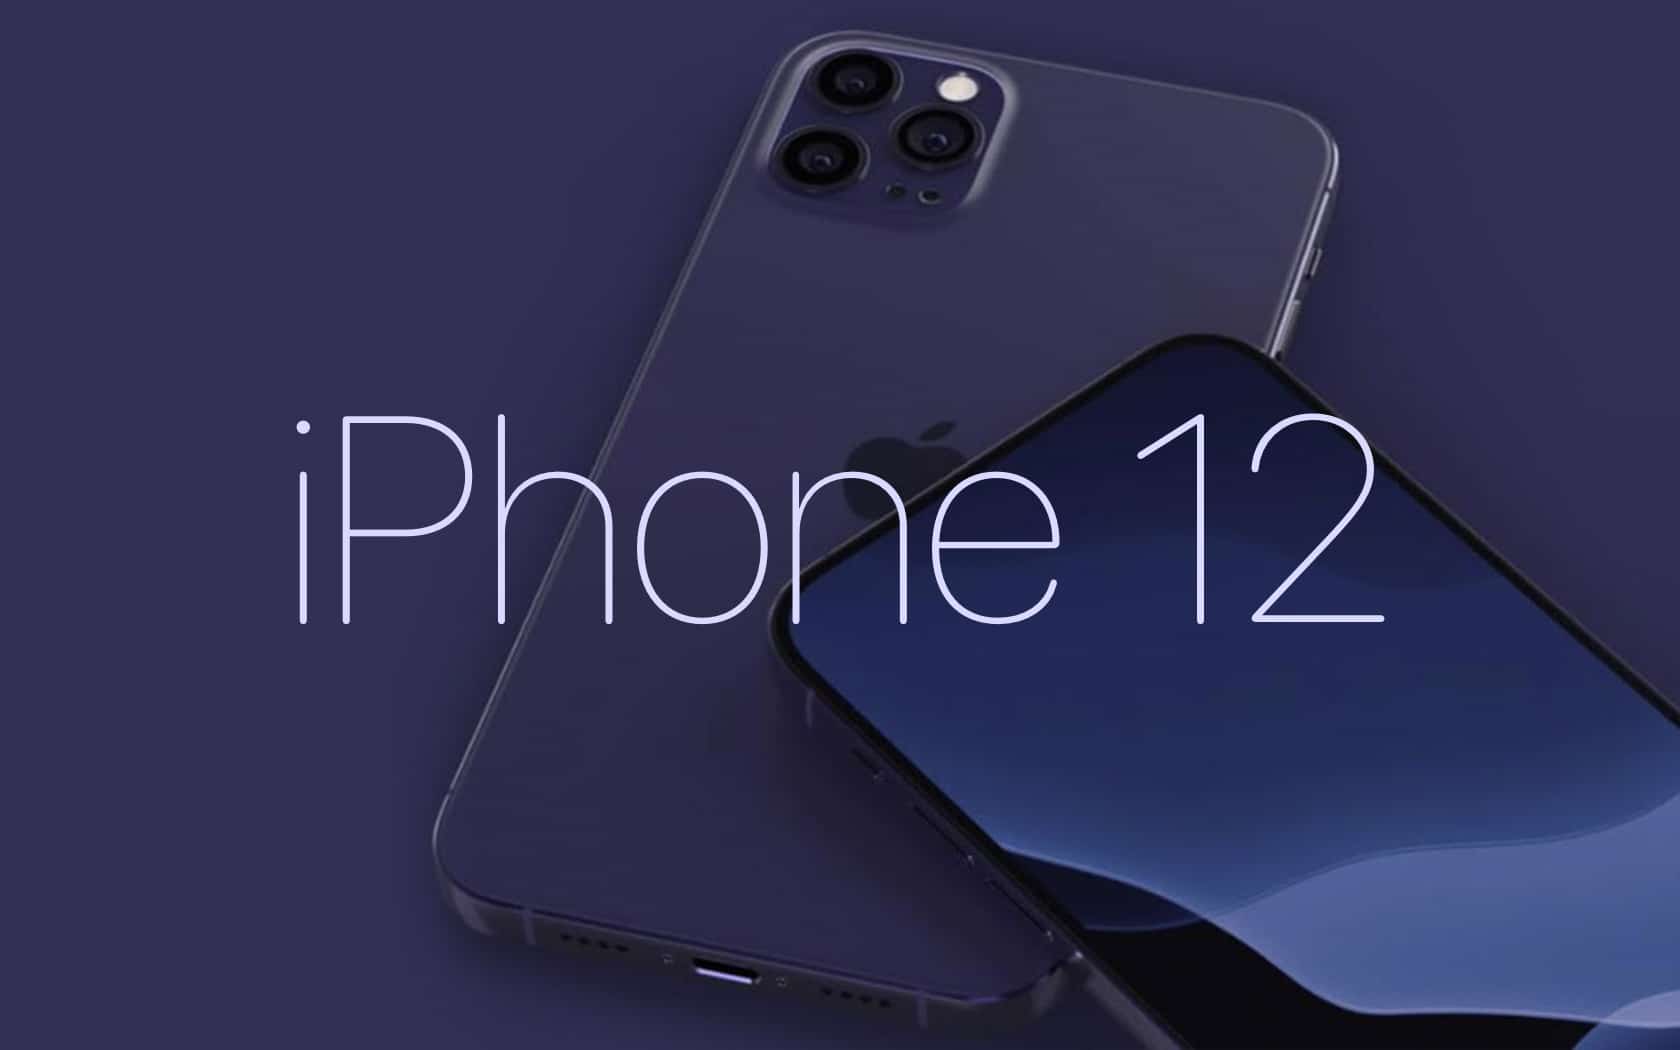 The iPhone 12 Pros may come with 120Hz screens and bigger batteries